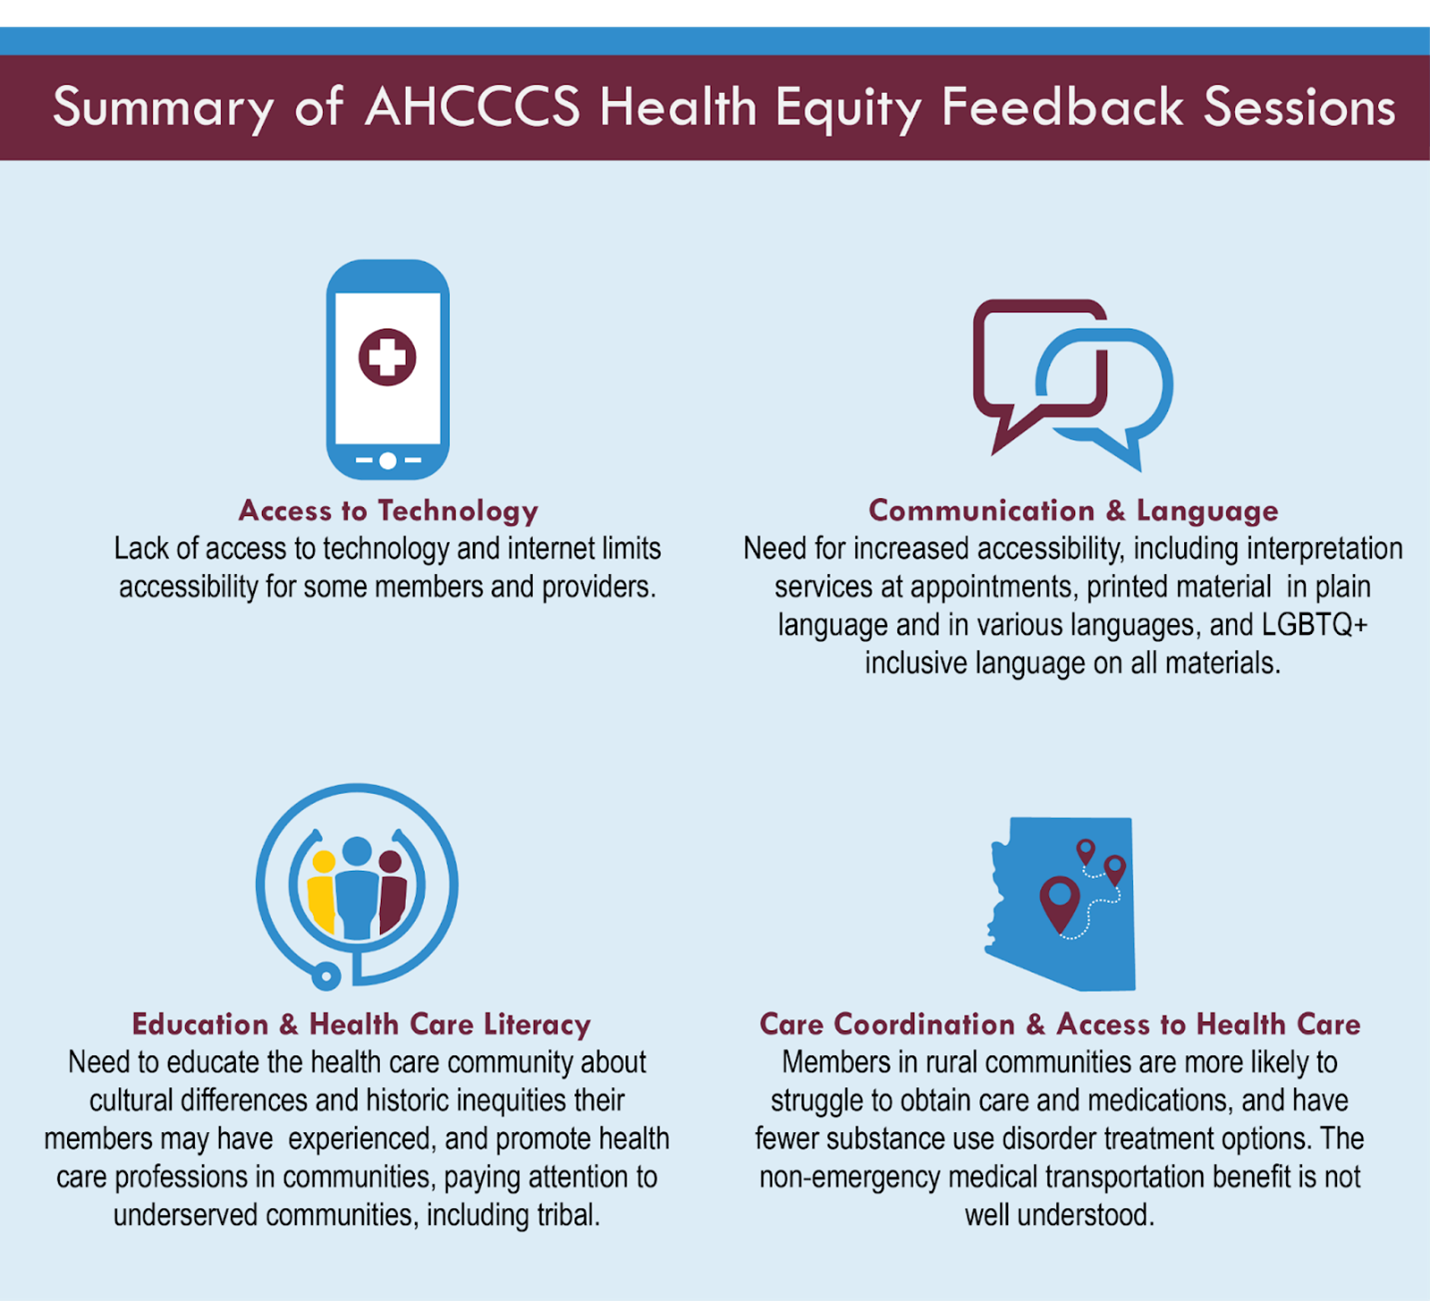 Summary of AHCCCS Health Equity Feedback Sessions Infographic